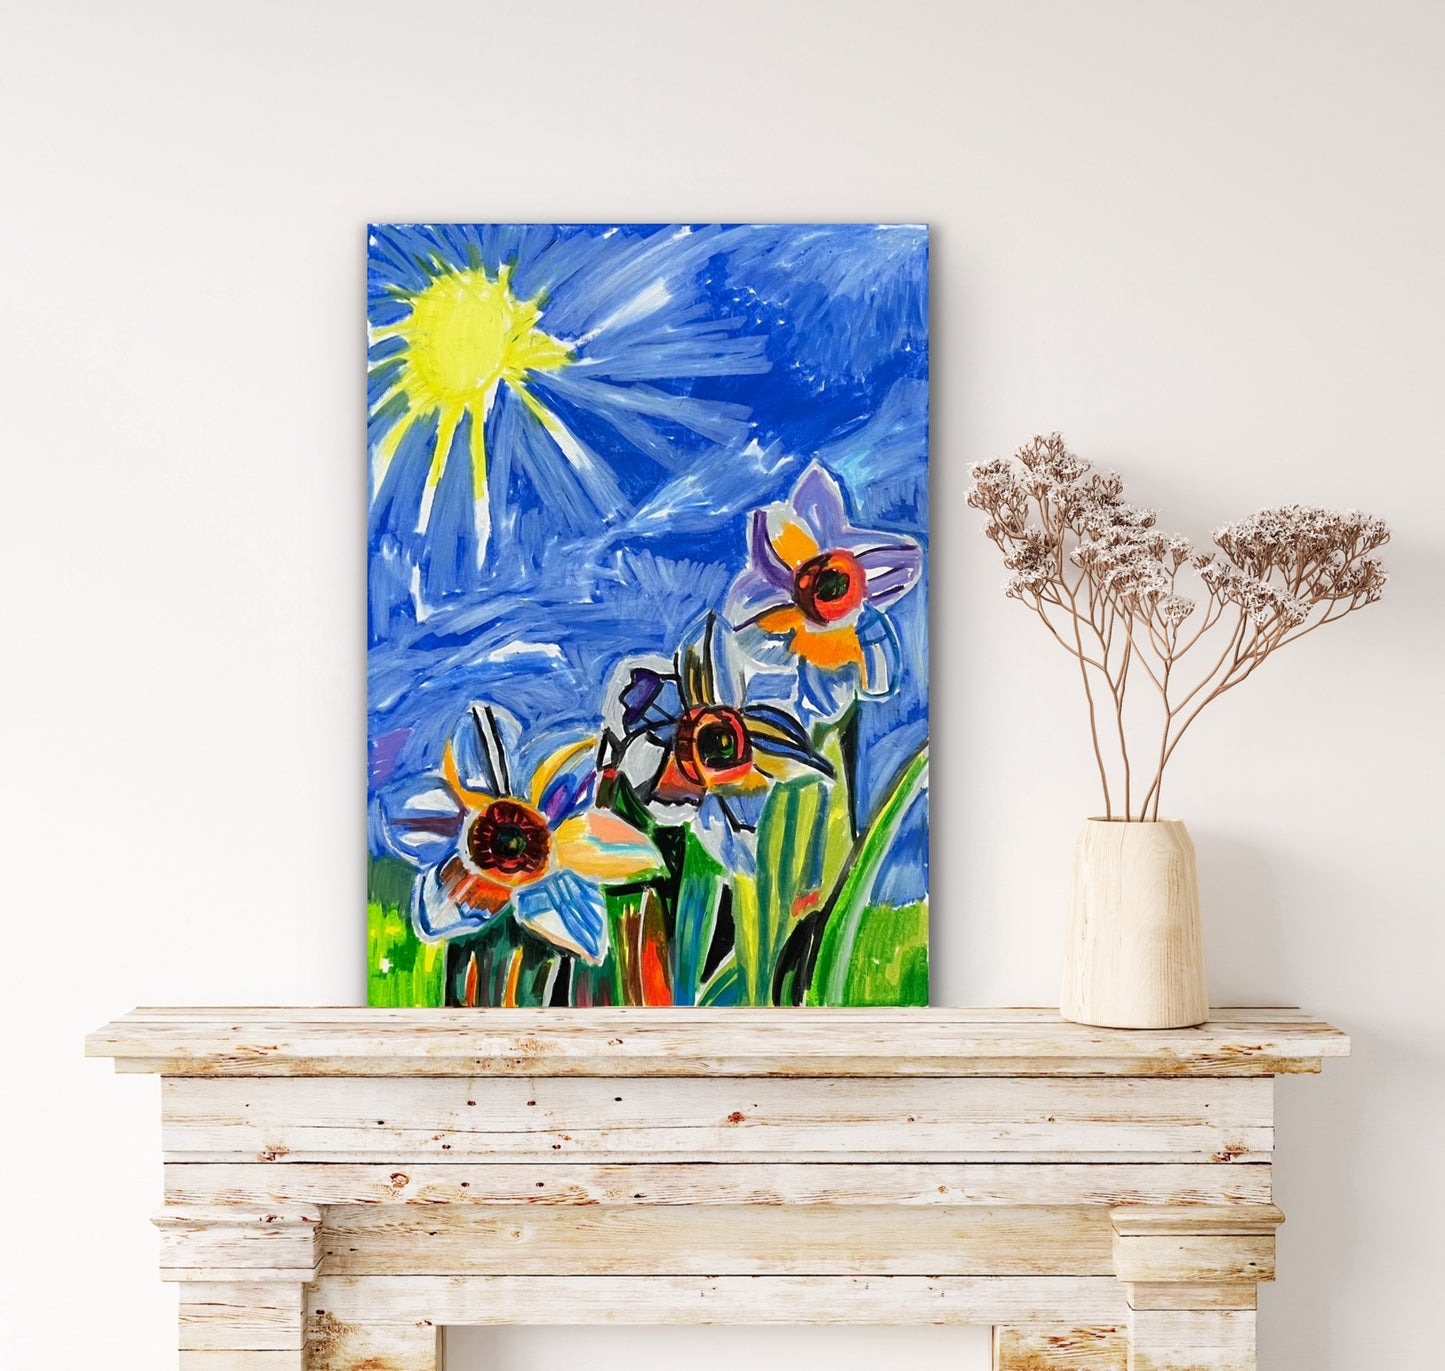 Sunny Day - Stretched Canvas Print in more sizes